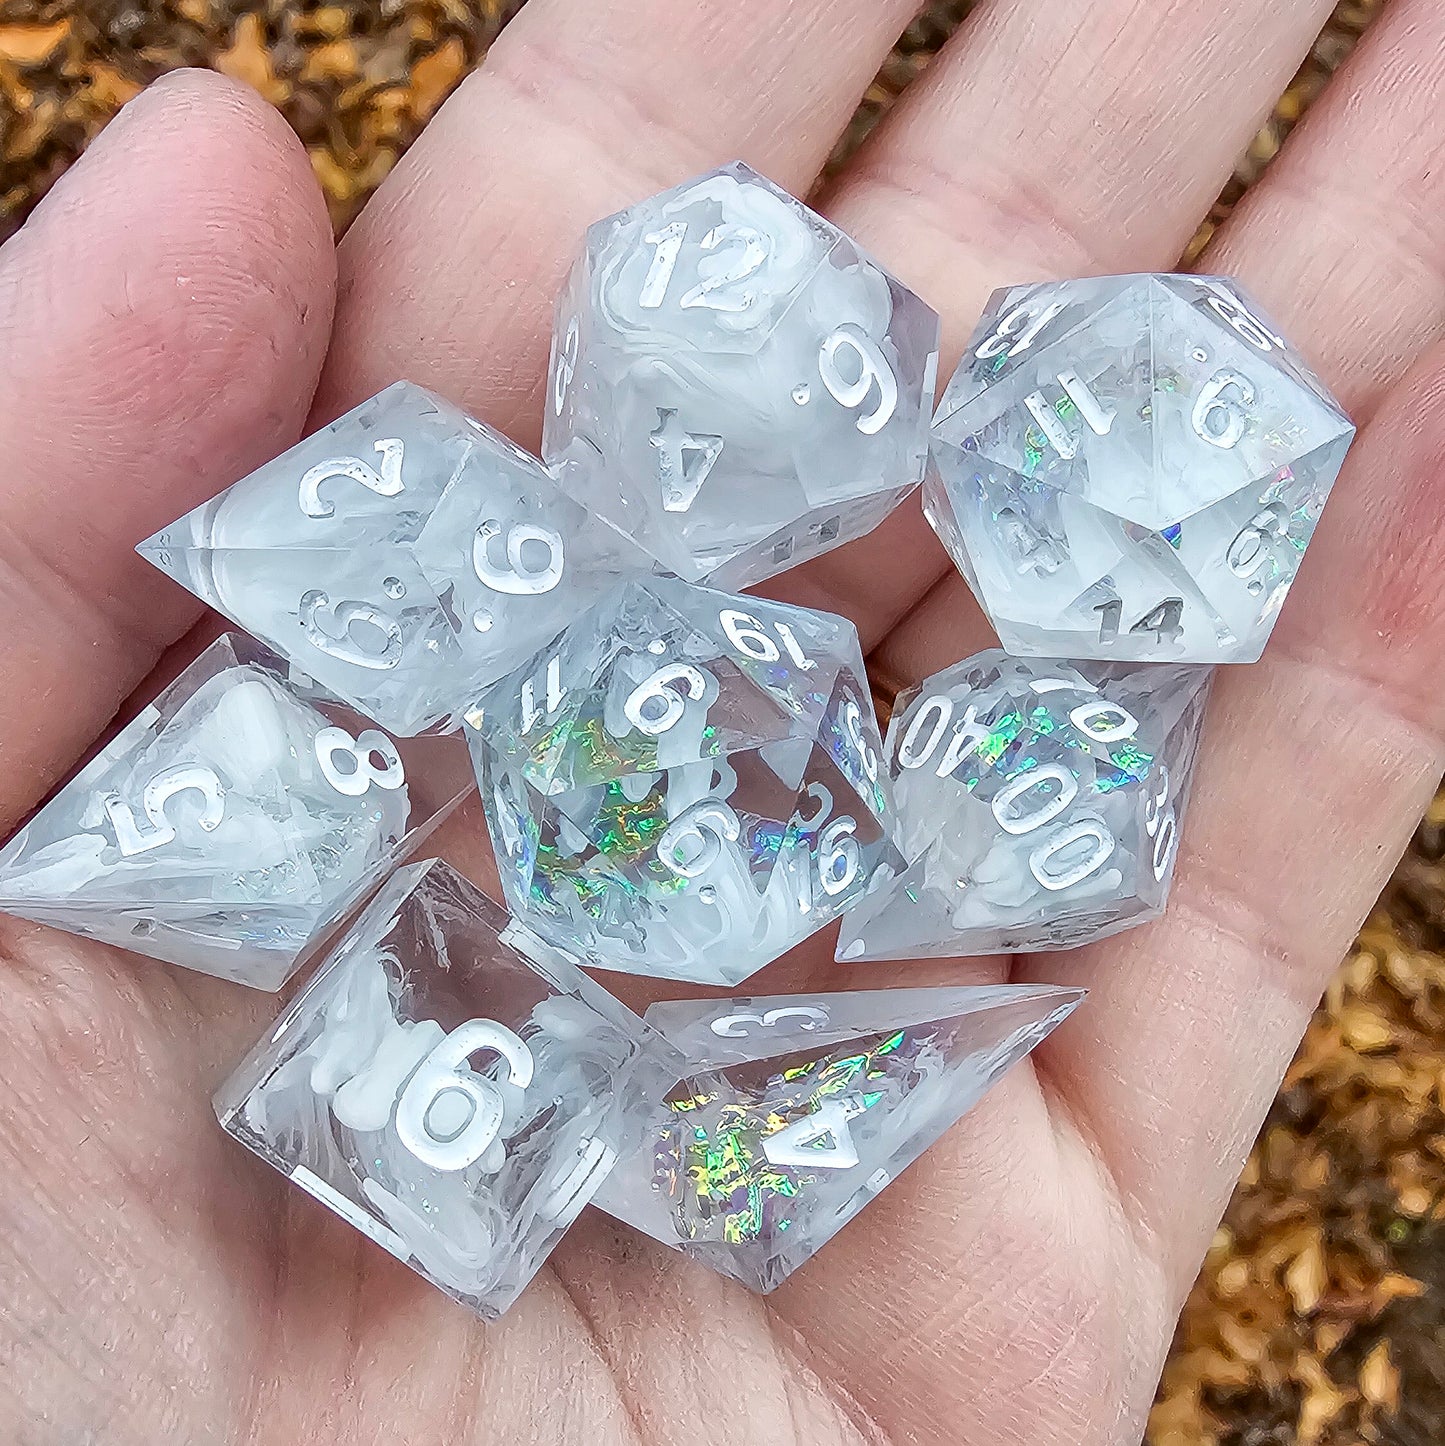 Ray of Frost 8 piece dice set